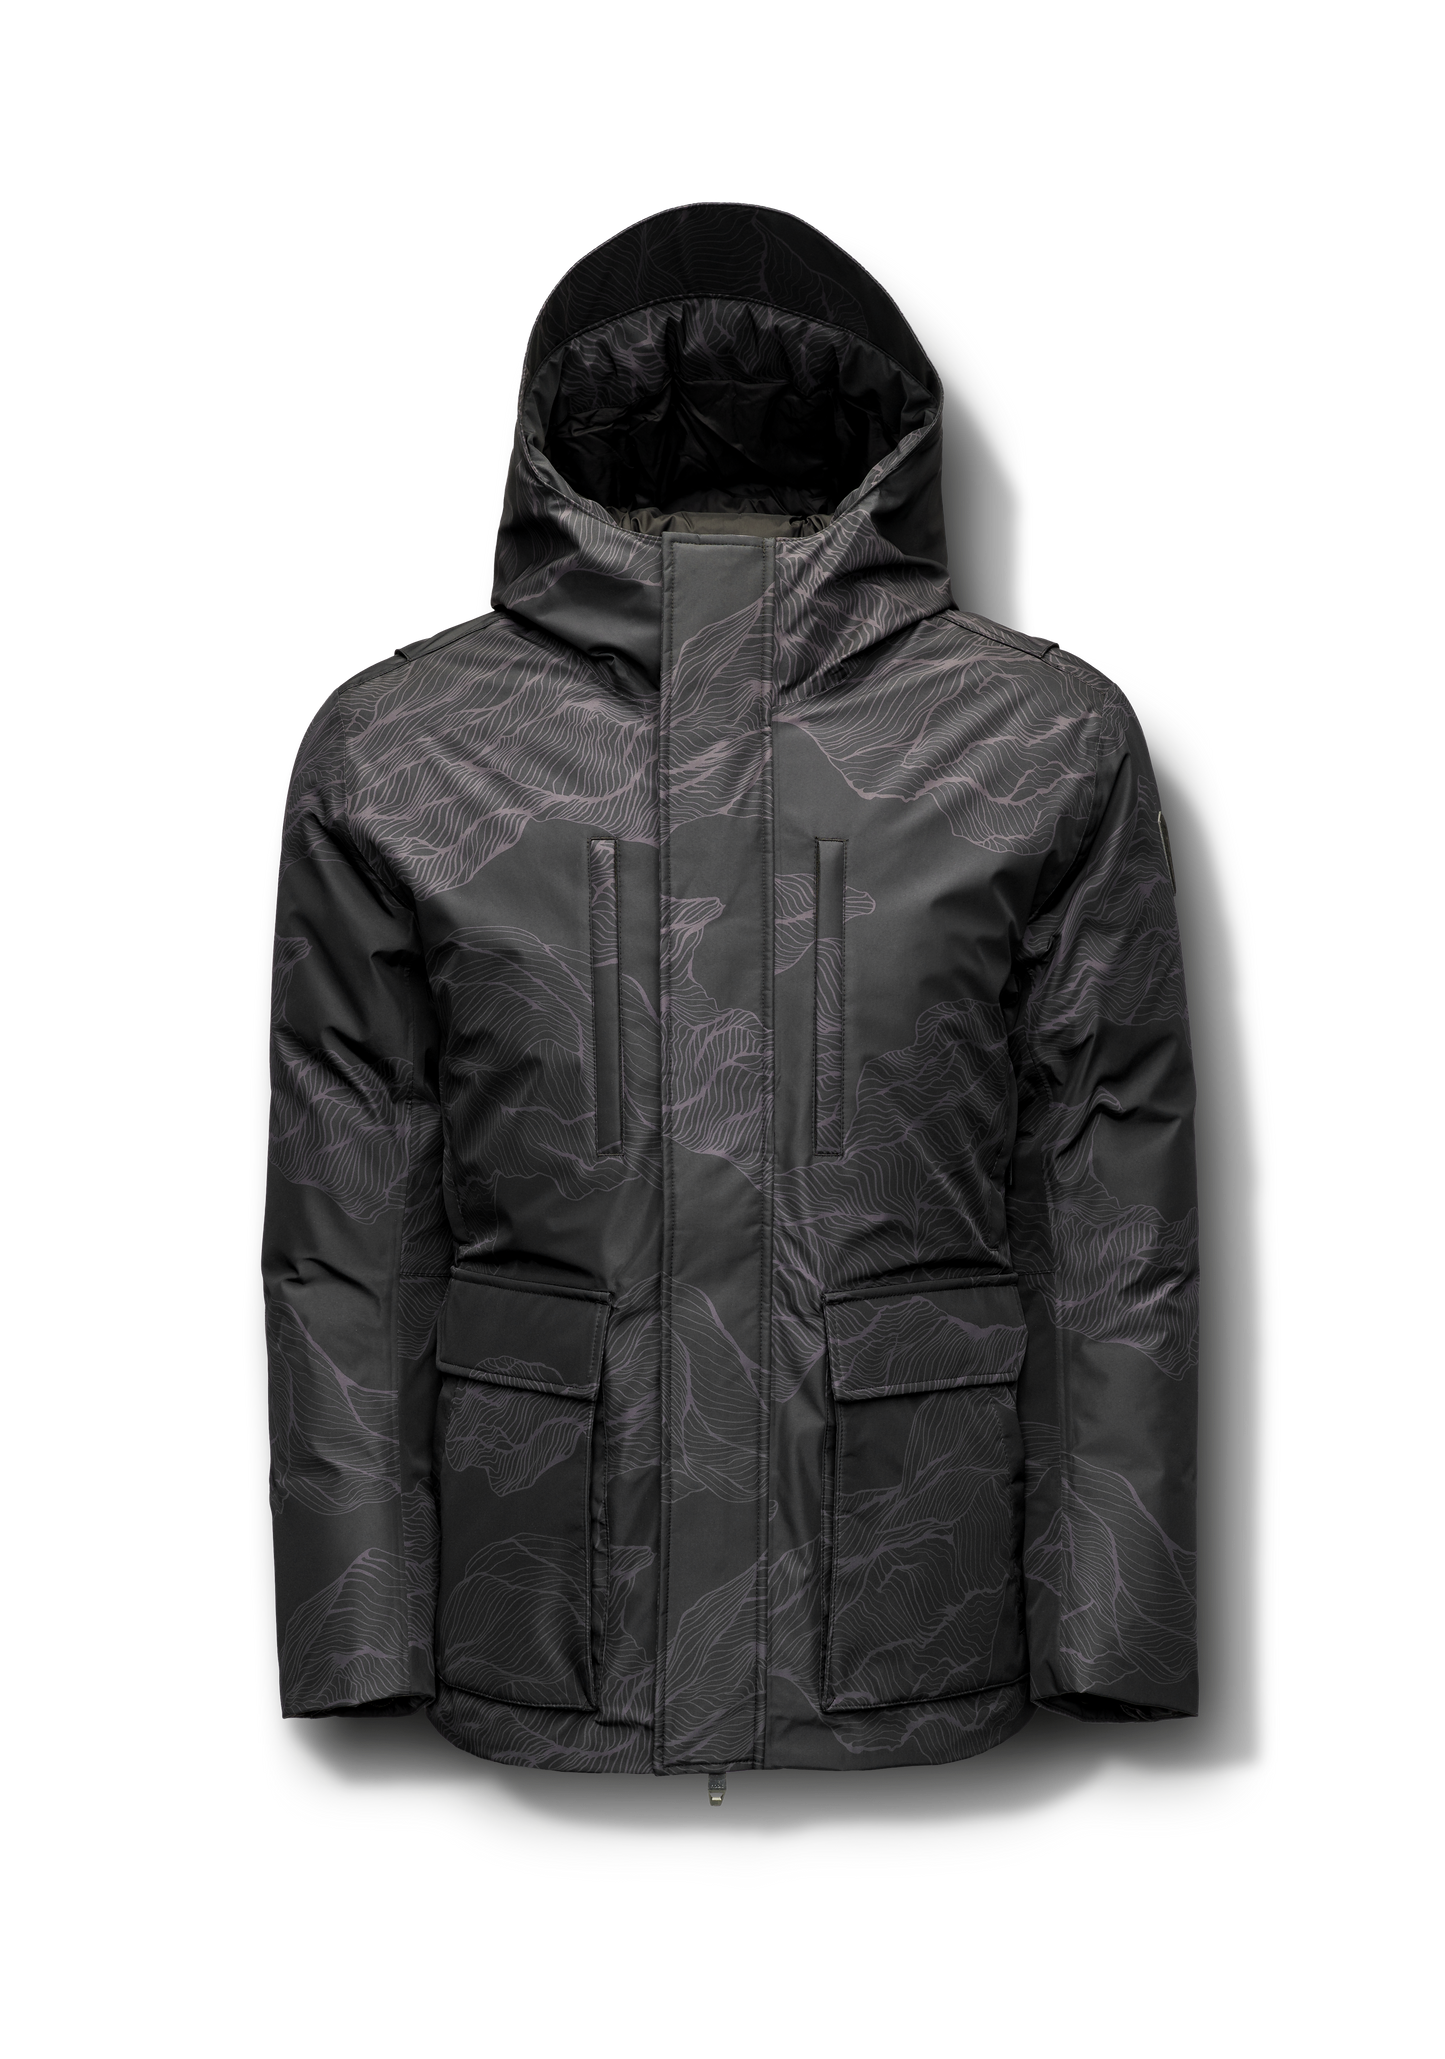 Geo Men's Short Parka in hip length, Canadian duck down insulation, non-removable hood, and two-way zipper, in Dark Desert